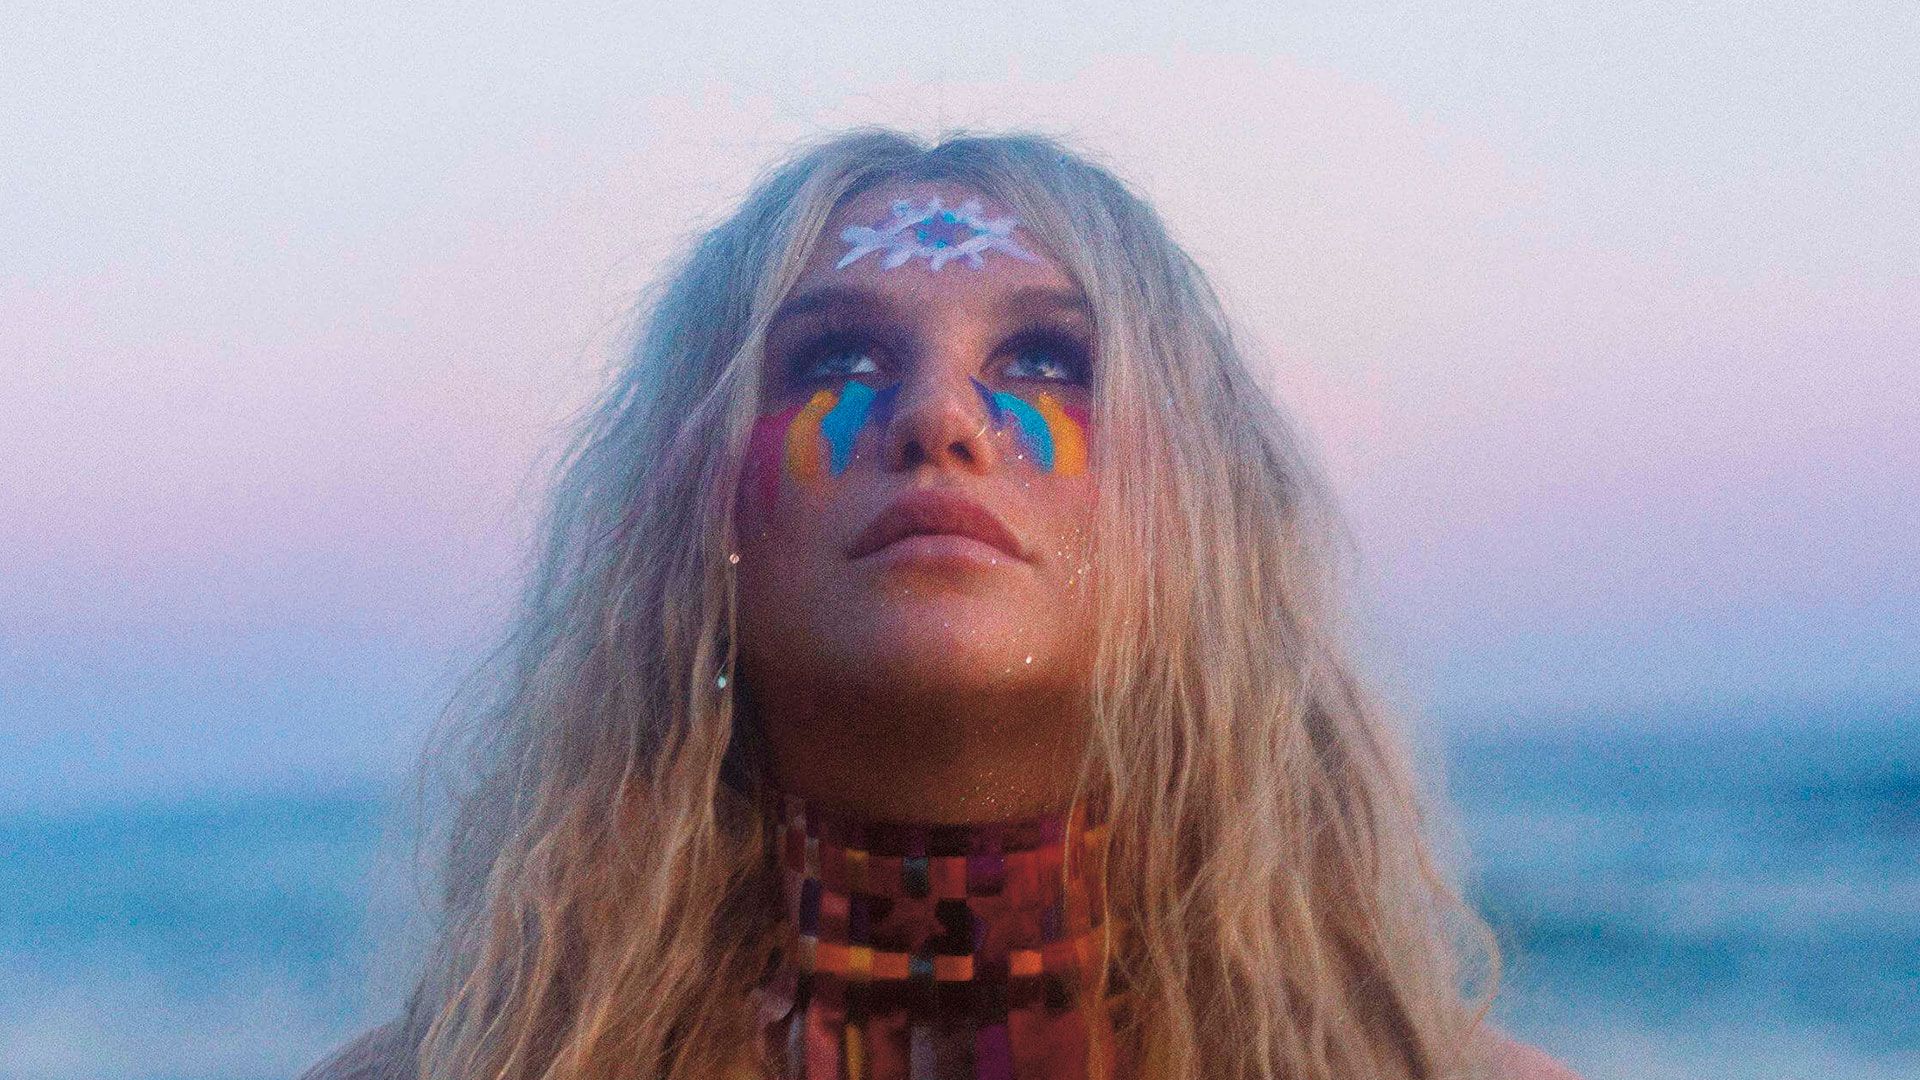 Kesha's new album Rainbow is a victory in itself amid a bitter legal conflict. The Big Issue